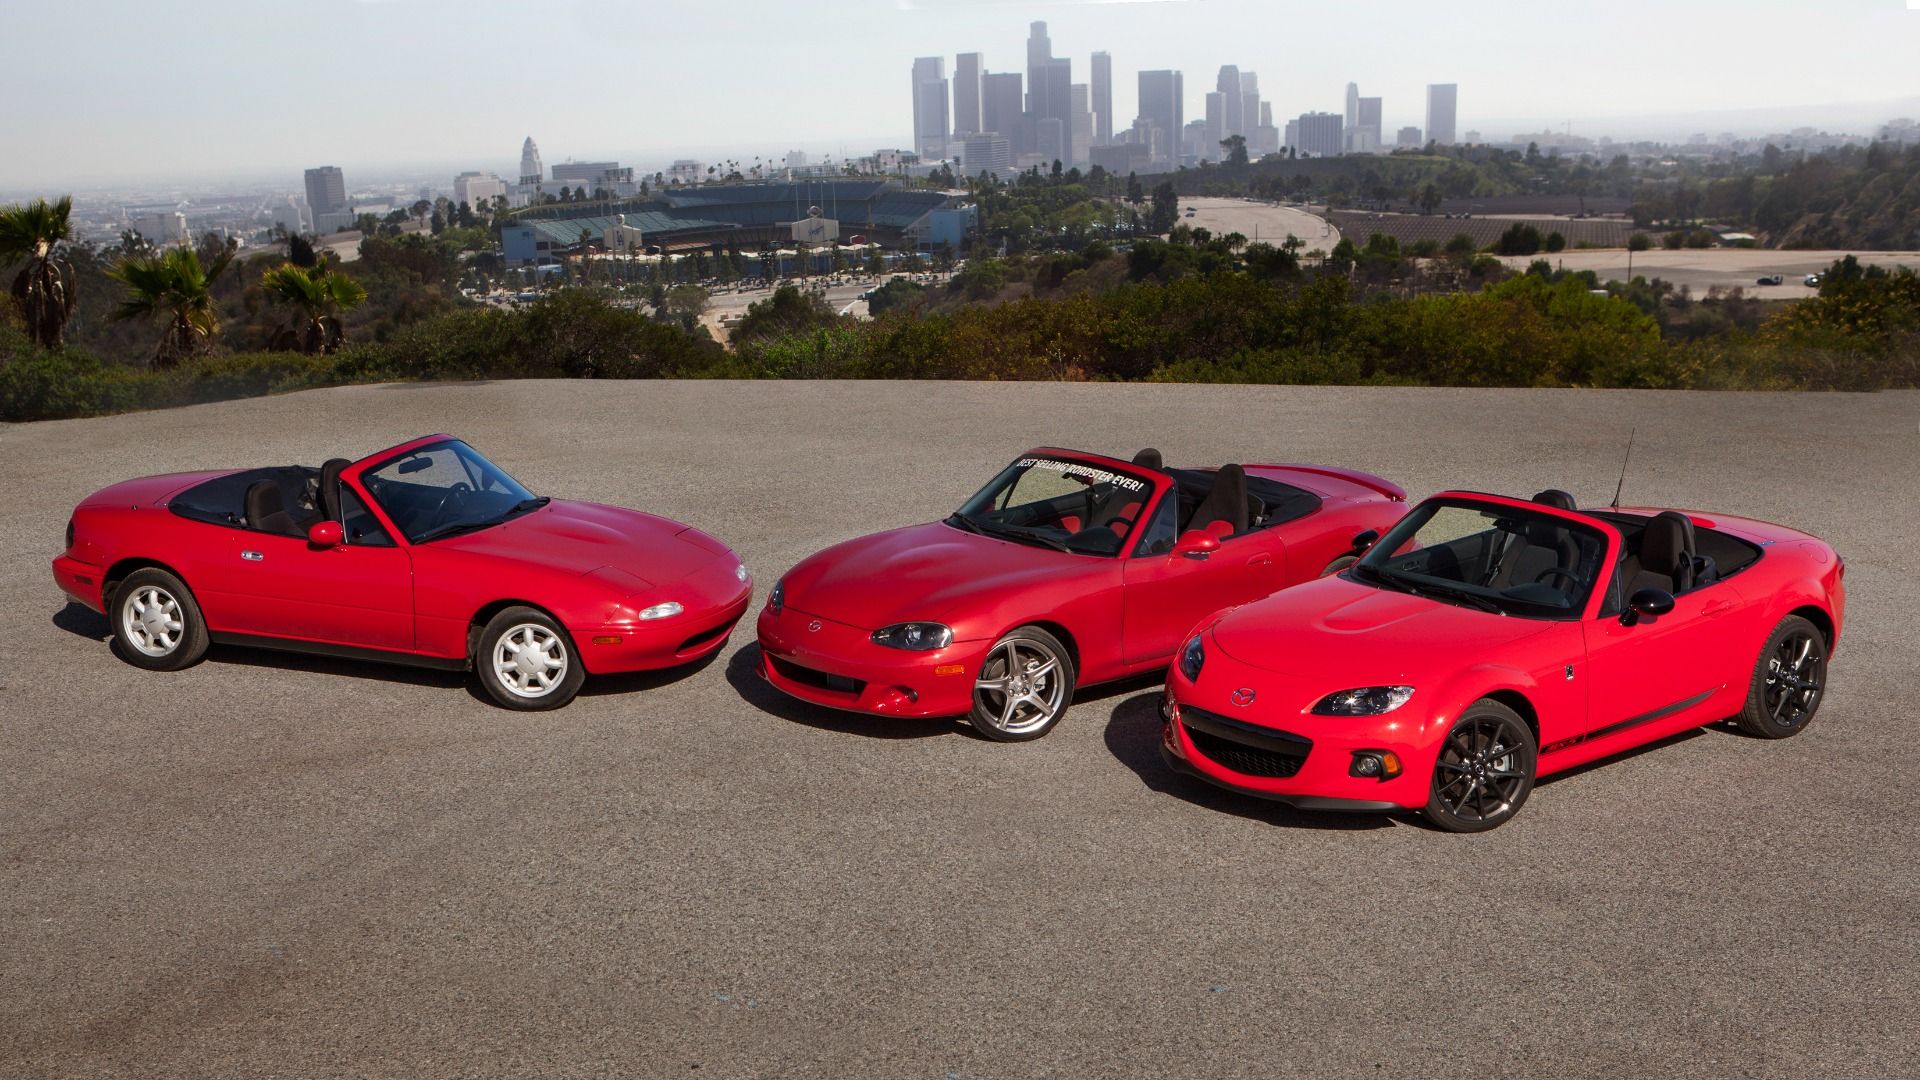 Three red Miatas from three different years